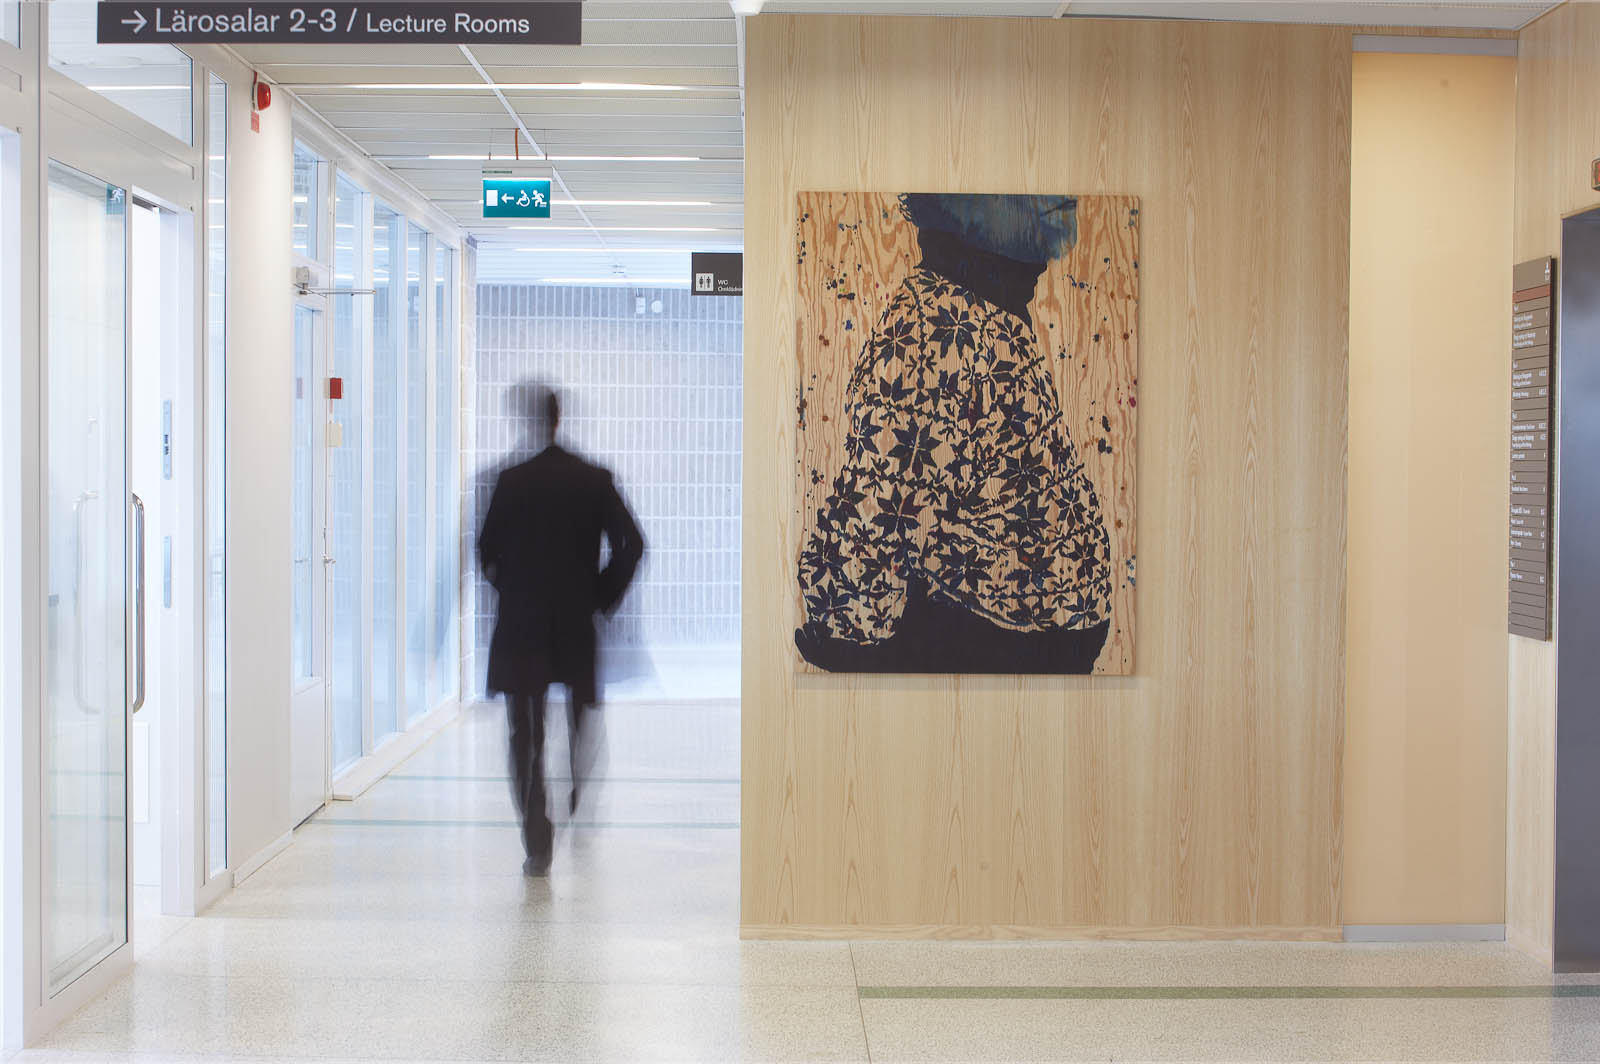 Painting on wood of an overweight person wearing a cardigan. In the corridor a blurred person walking. Robert Lucander, 13 paintings.